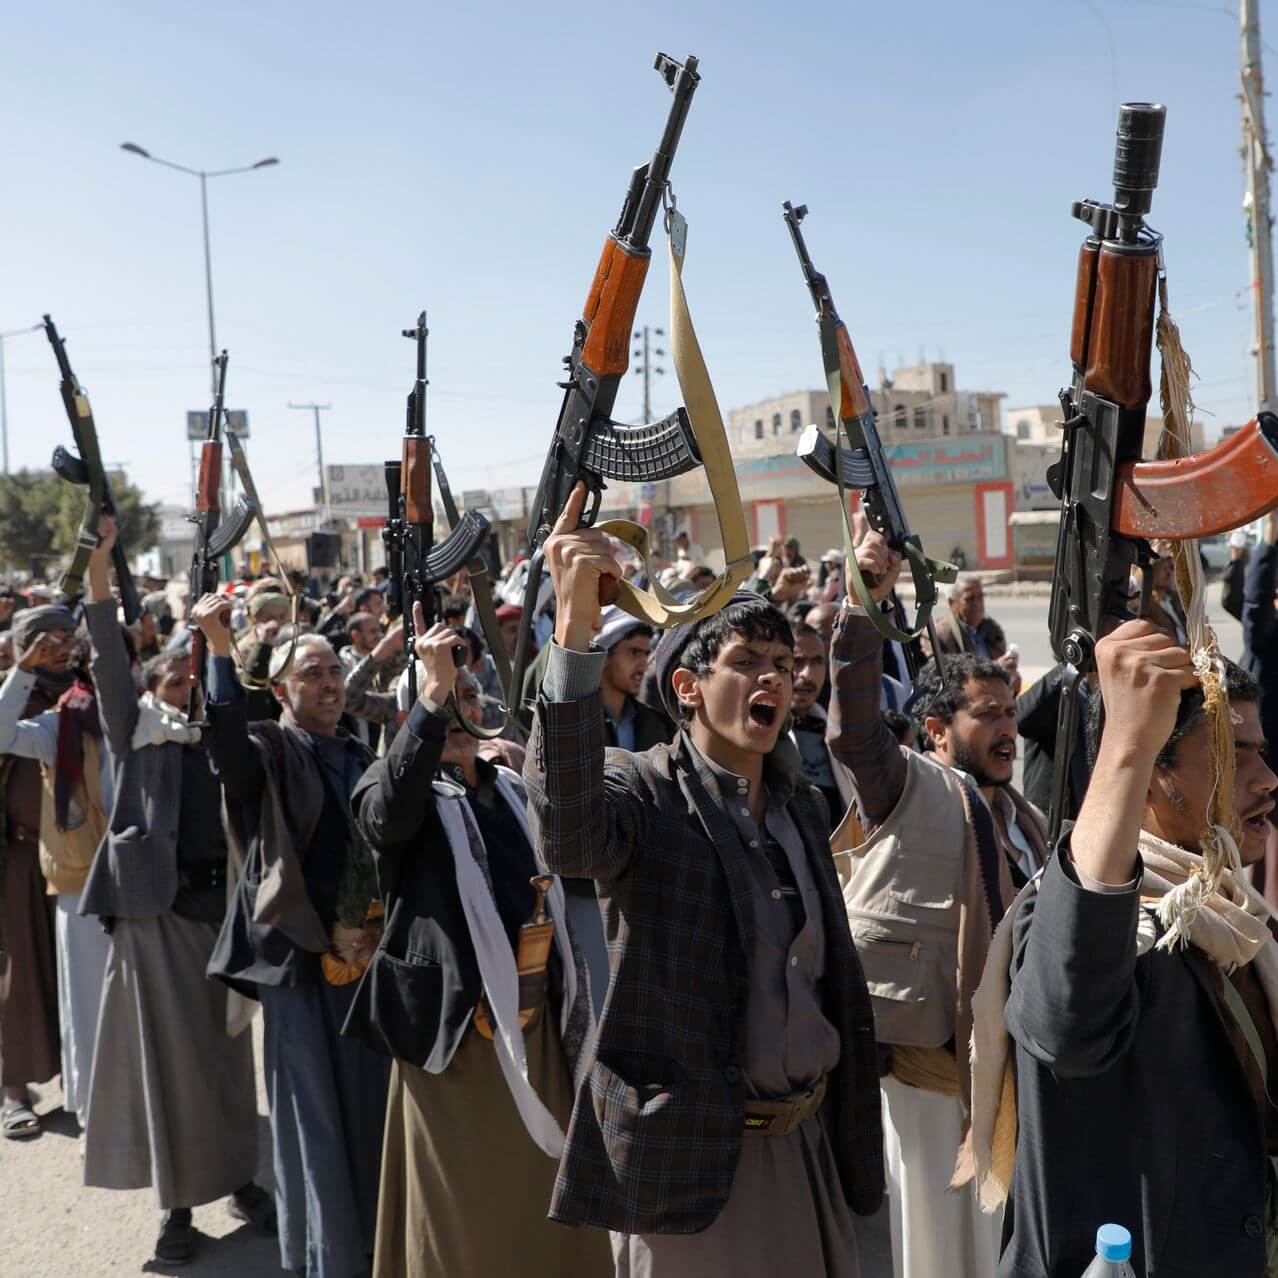 US Designates Yemen’s Houthi Rebels as ‘Global Terrorists’ Amid Escalating Tensions in Red Sea